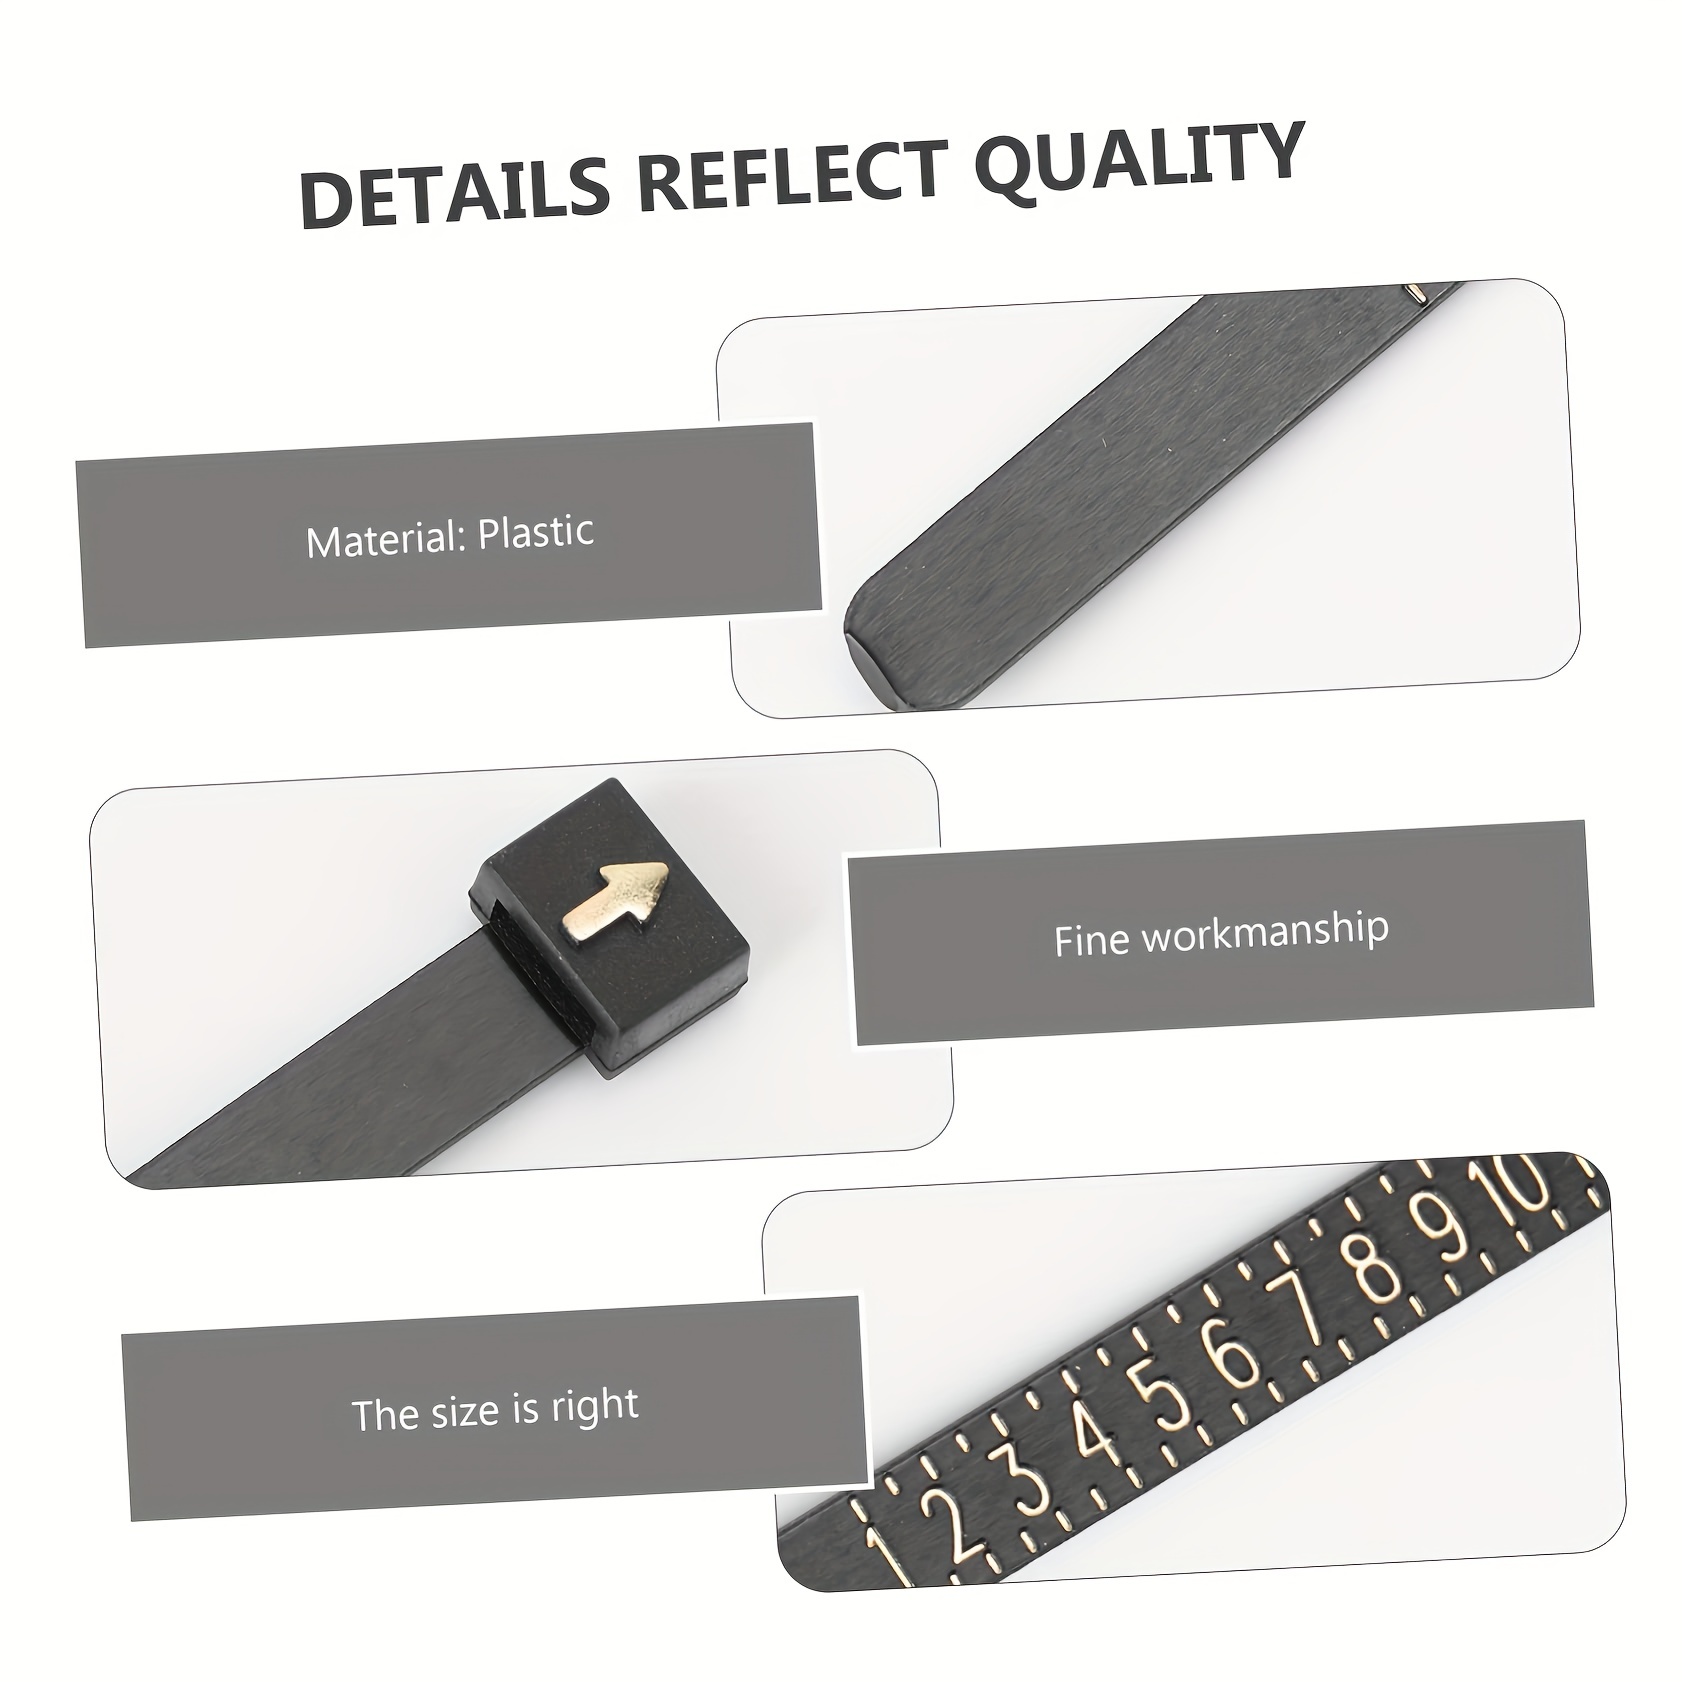 Sizing Tool - Find your ring size – Honor Valor